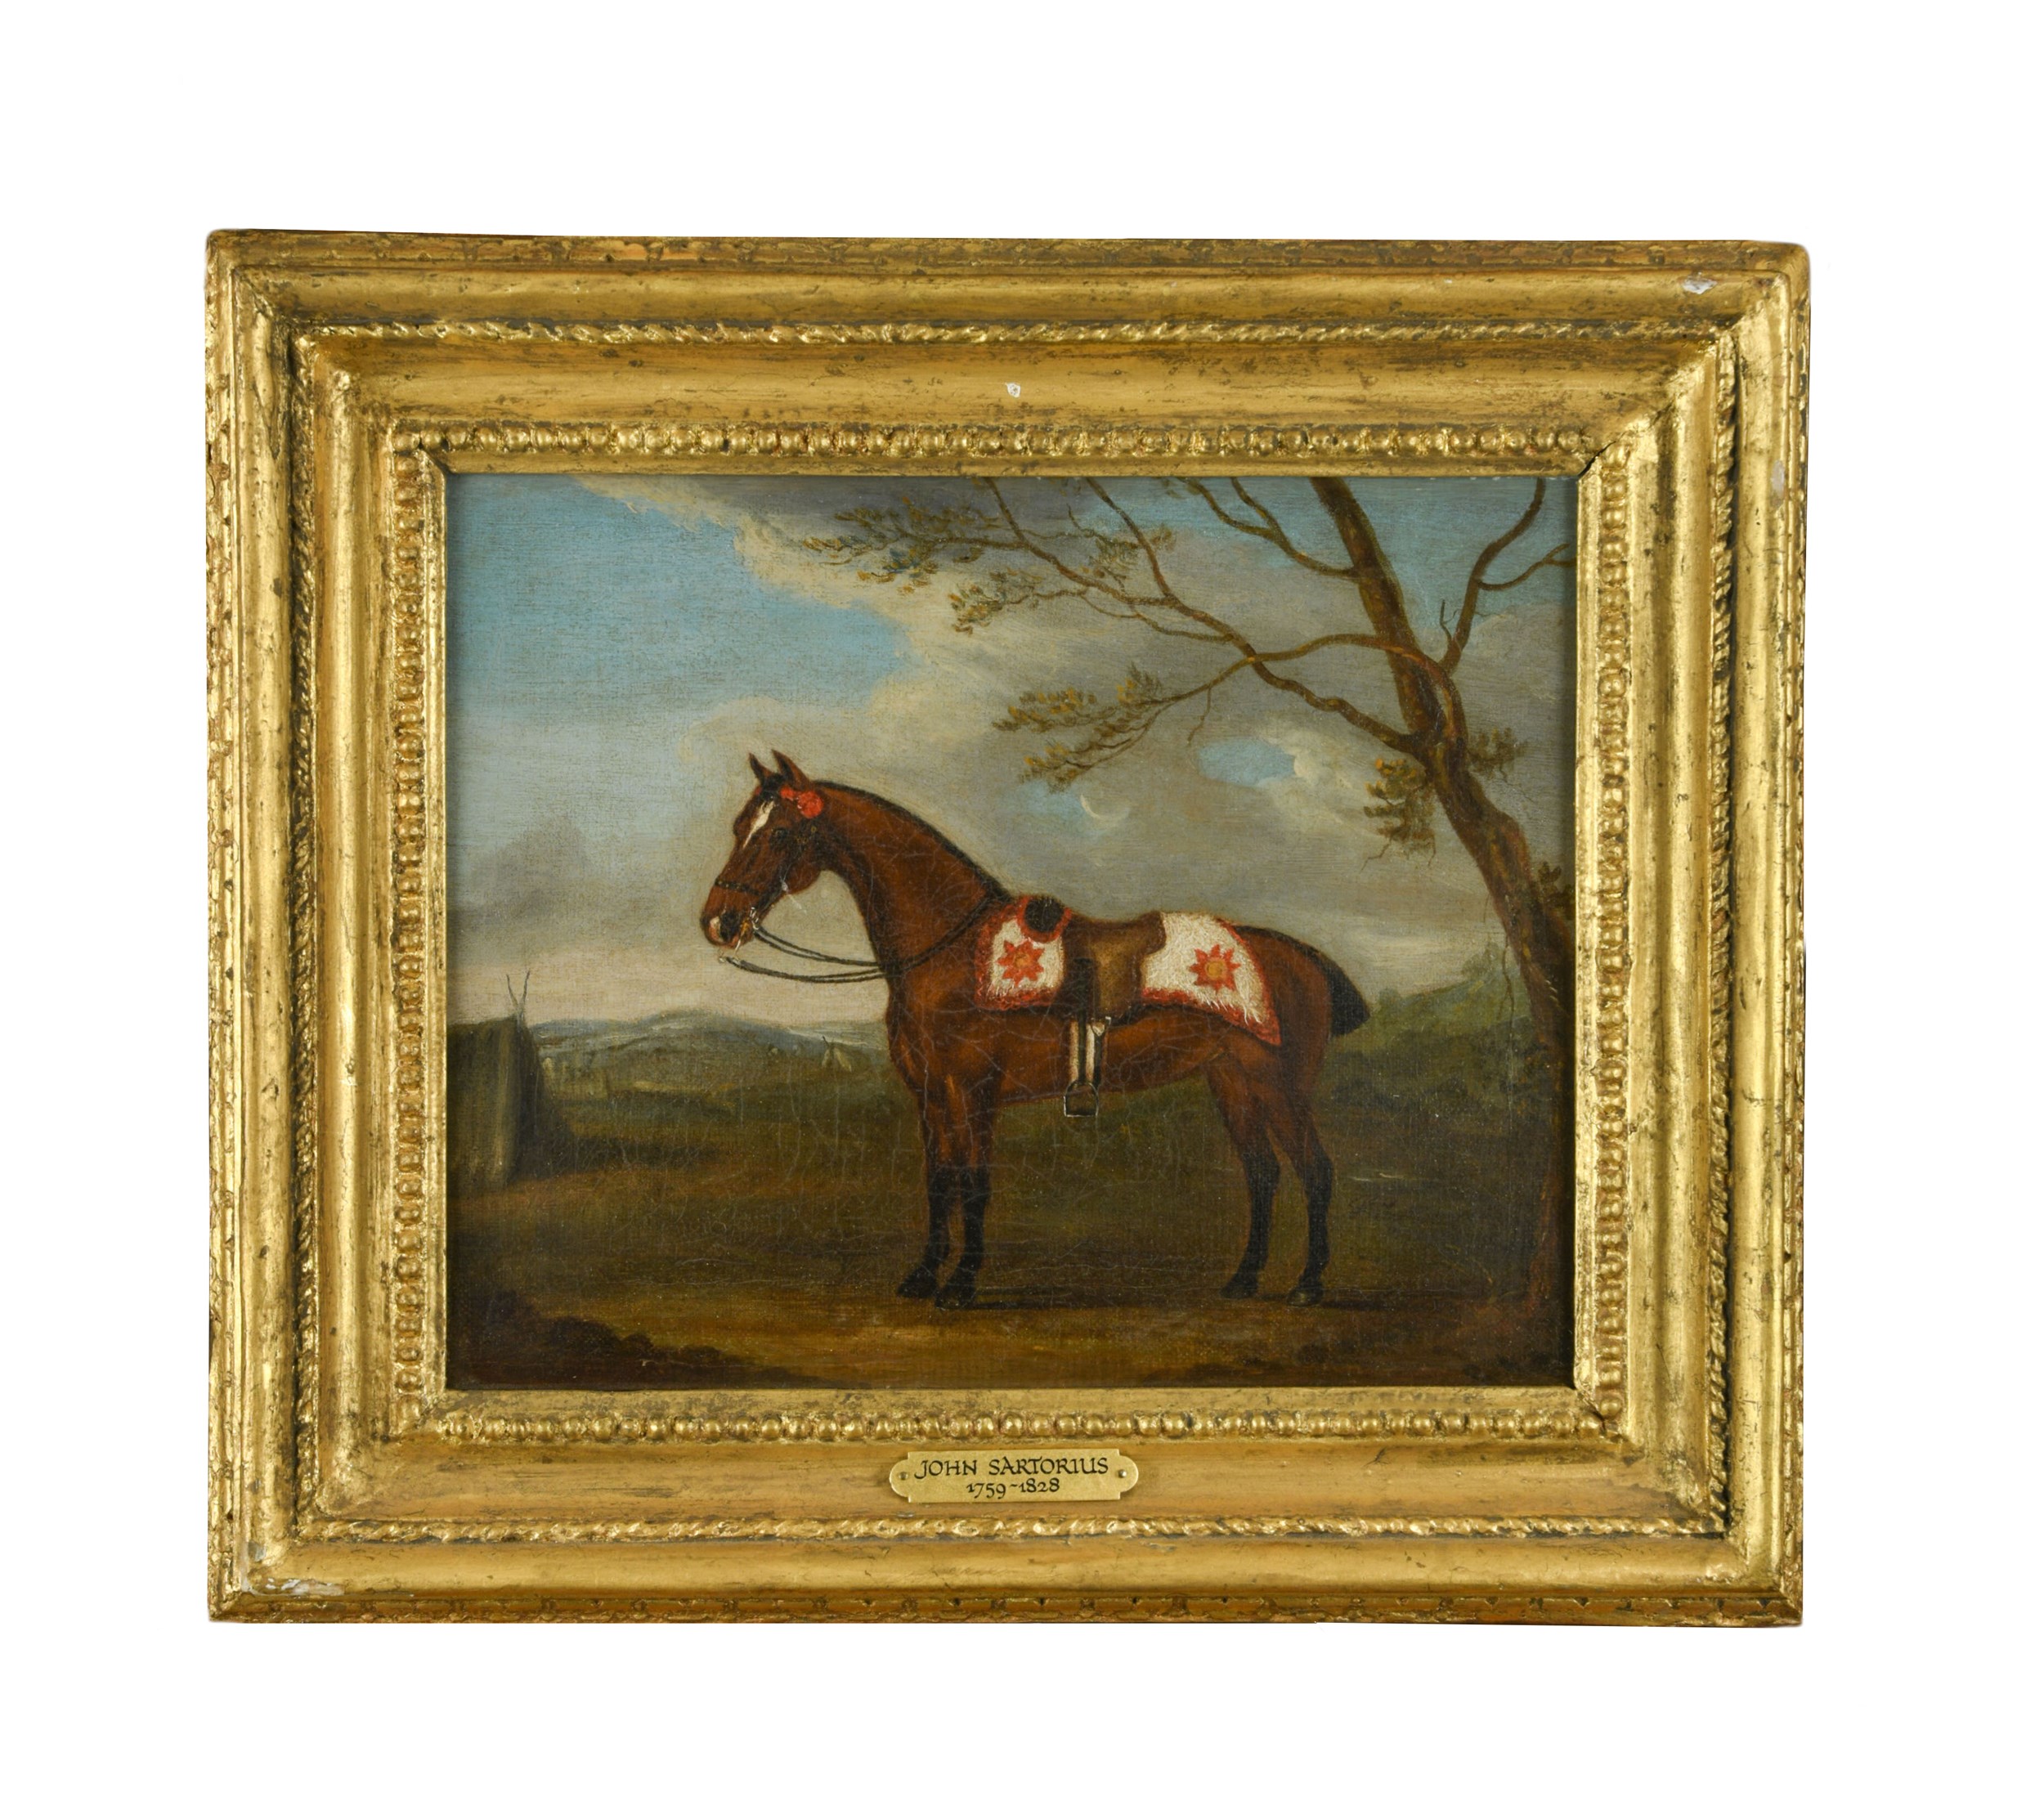 John Nost Sartorius (British 1755-1828) A bay military horse or charger, caparisoned with a